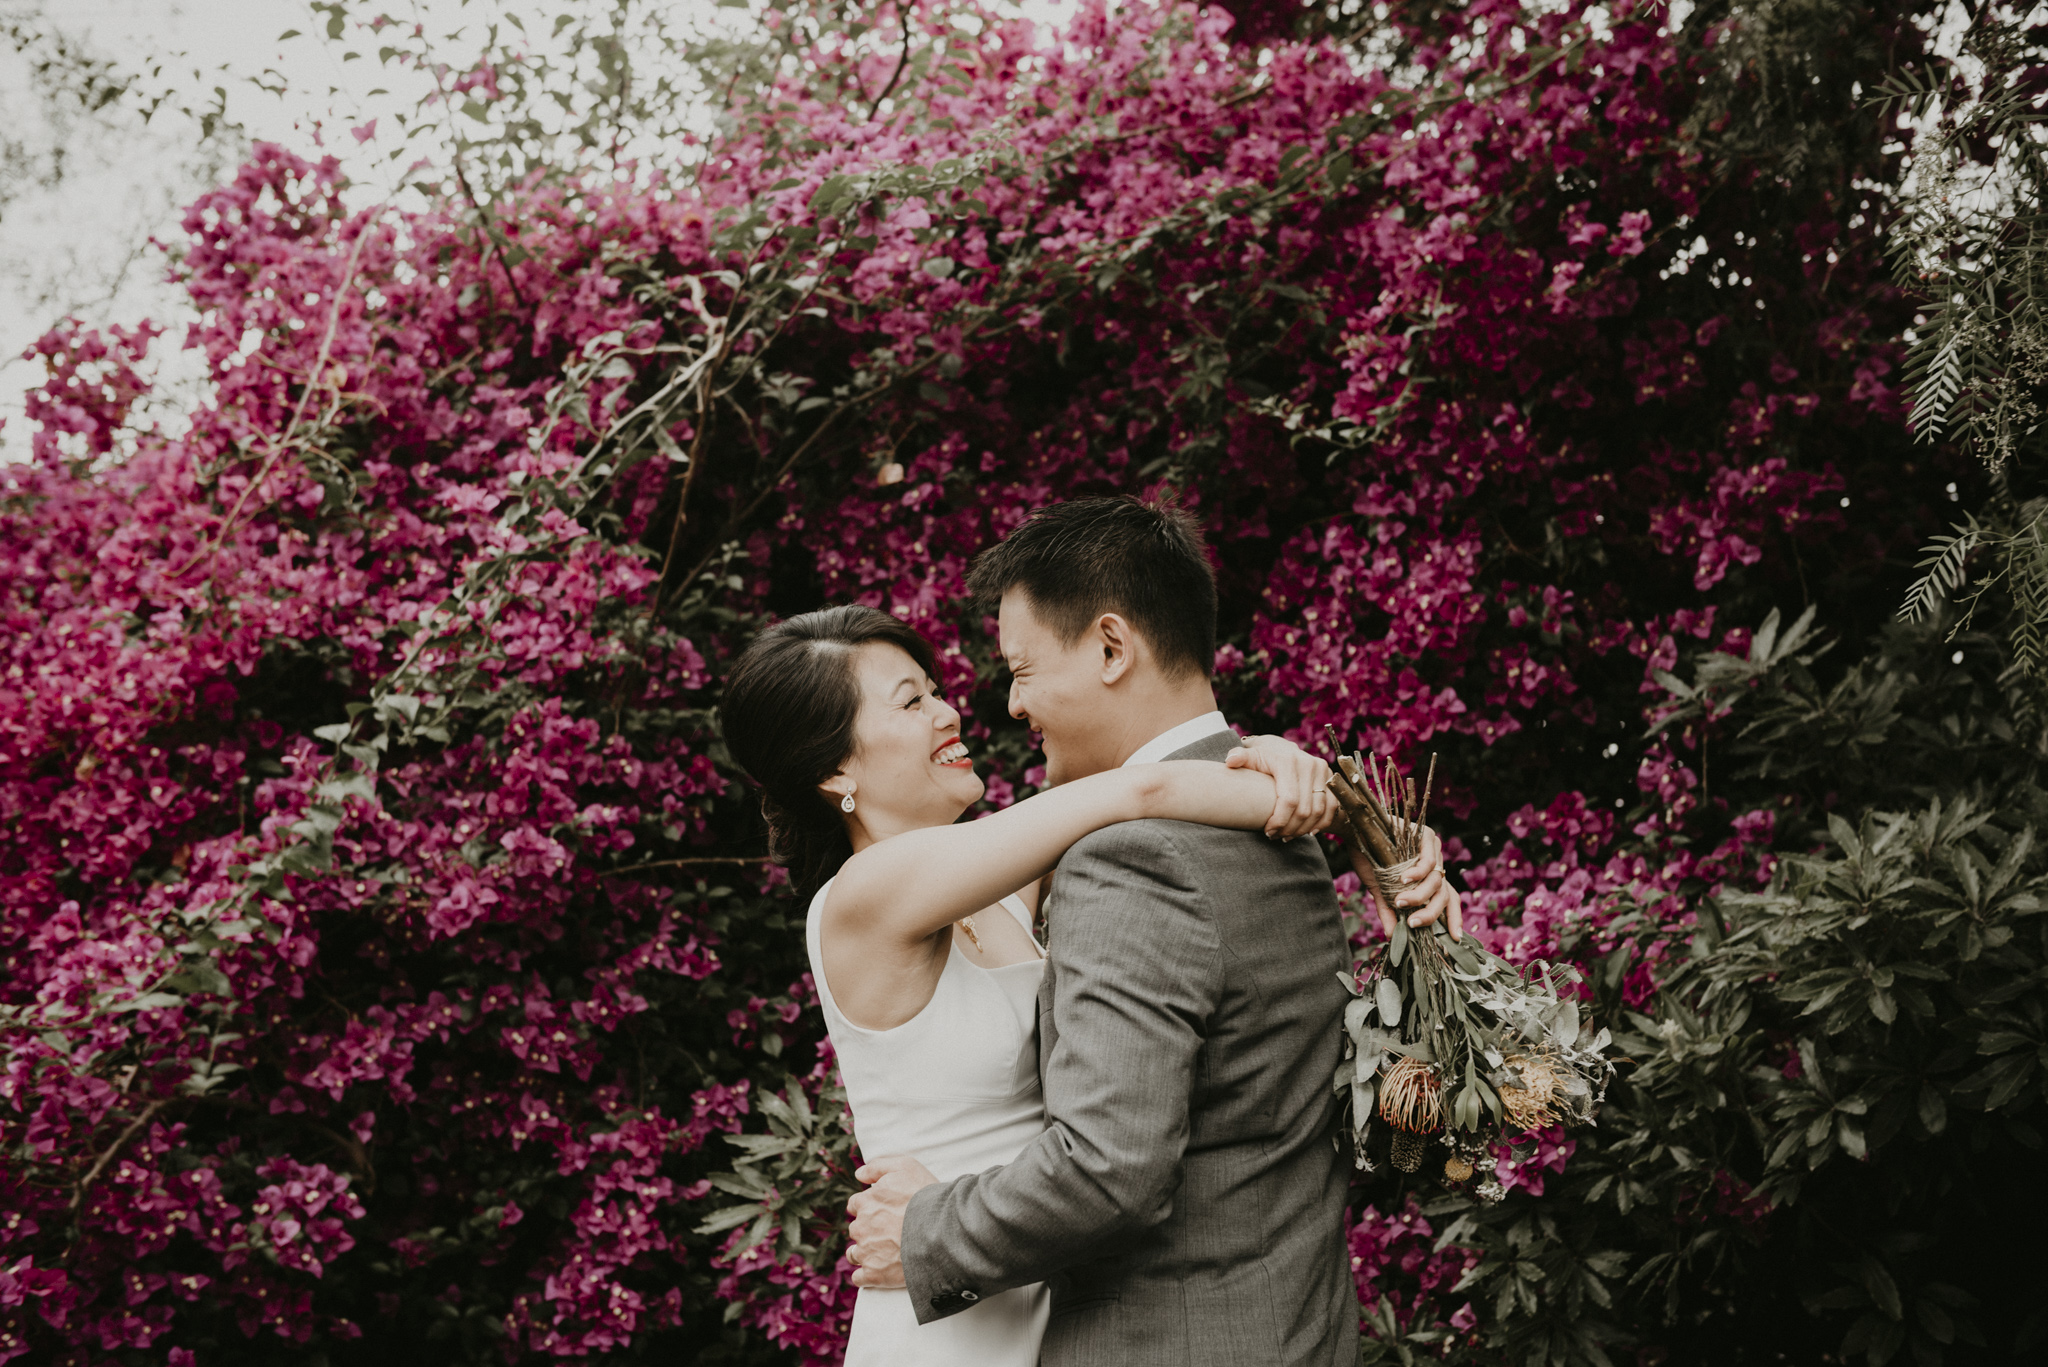 agnes-duy-15th-december-2018-chinese-vietnamese-wedding-tea-ceremony-yarraville-home-house-documentary-candid-photographer-sarah-matler-photography-95